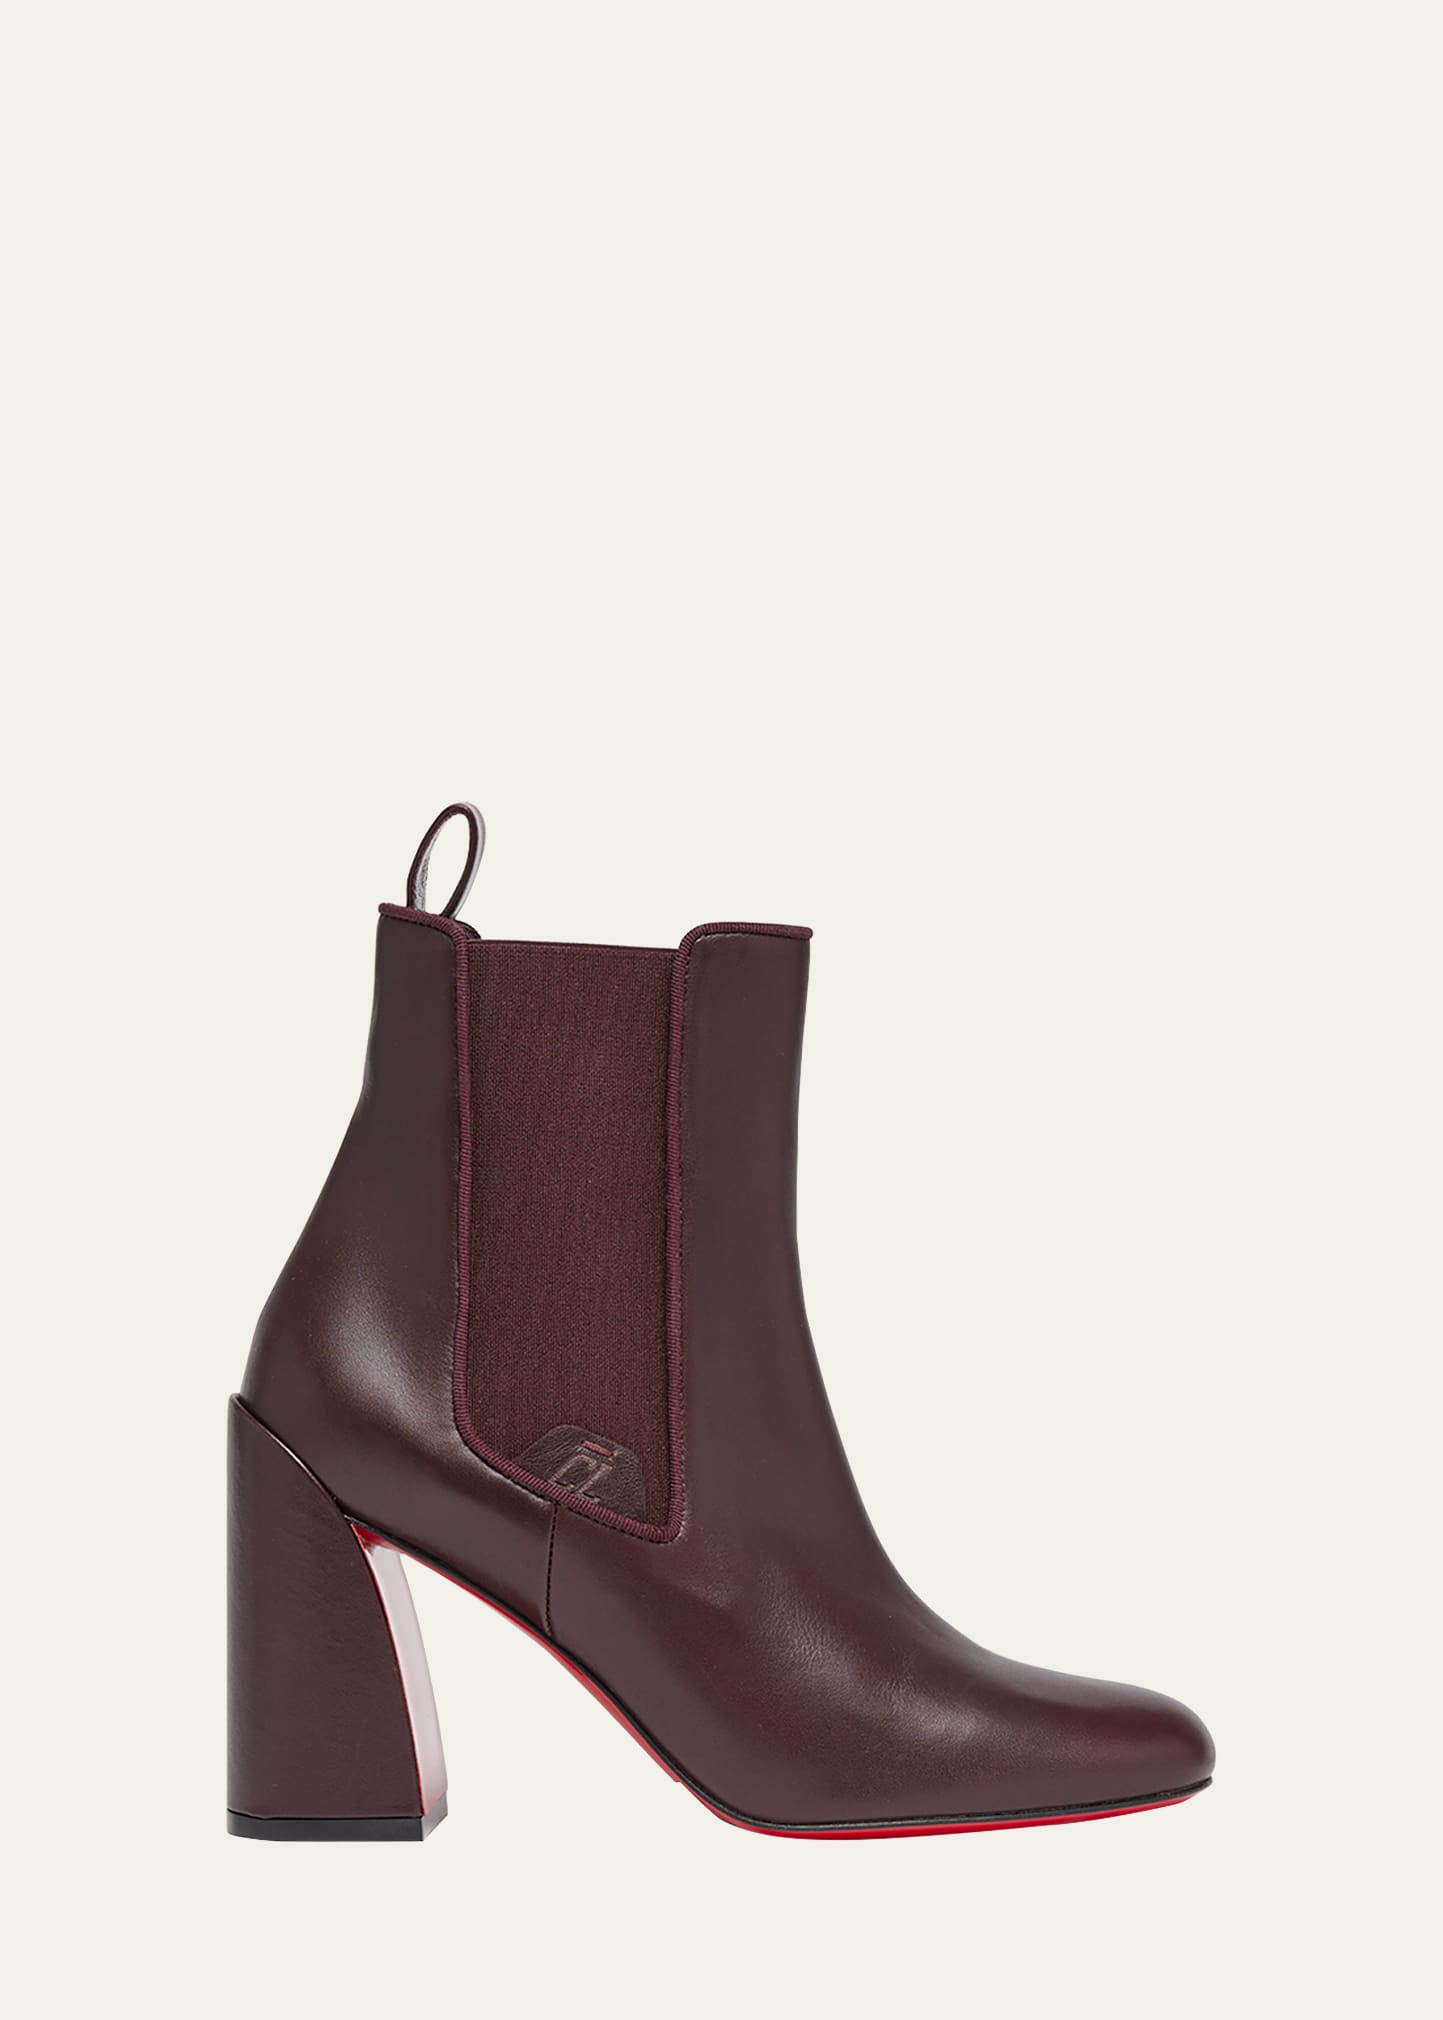 Turelastic Leather Red Sole Chelsea Boots